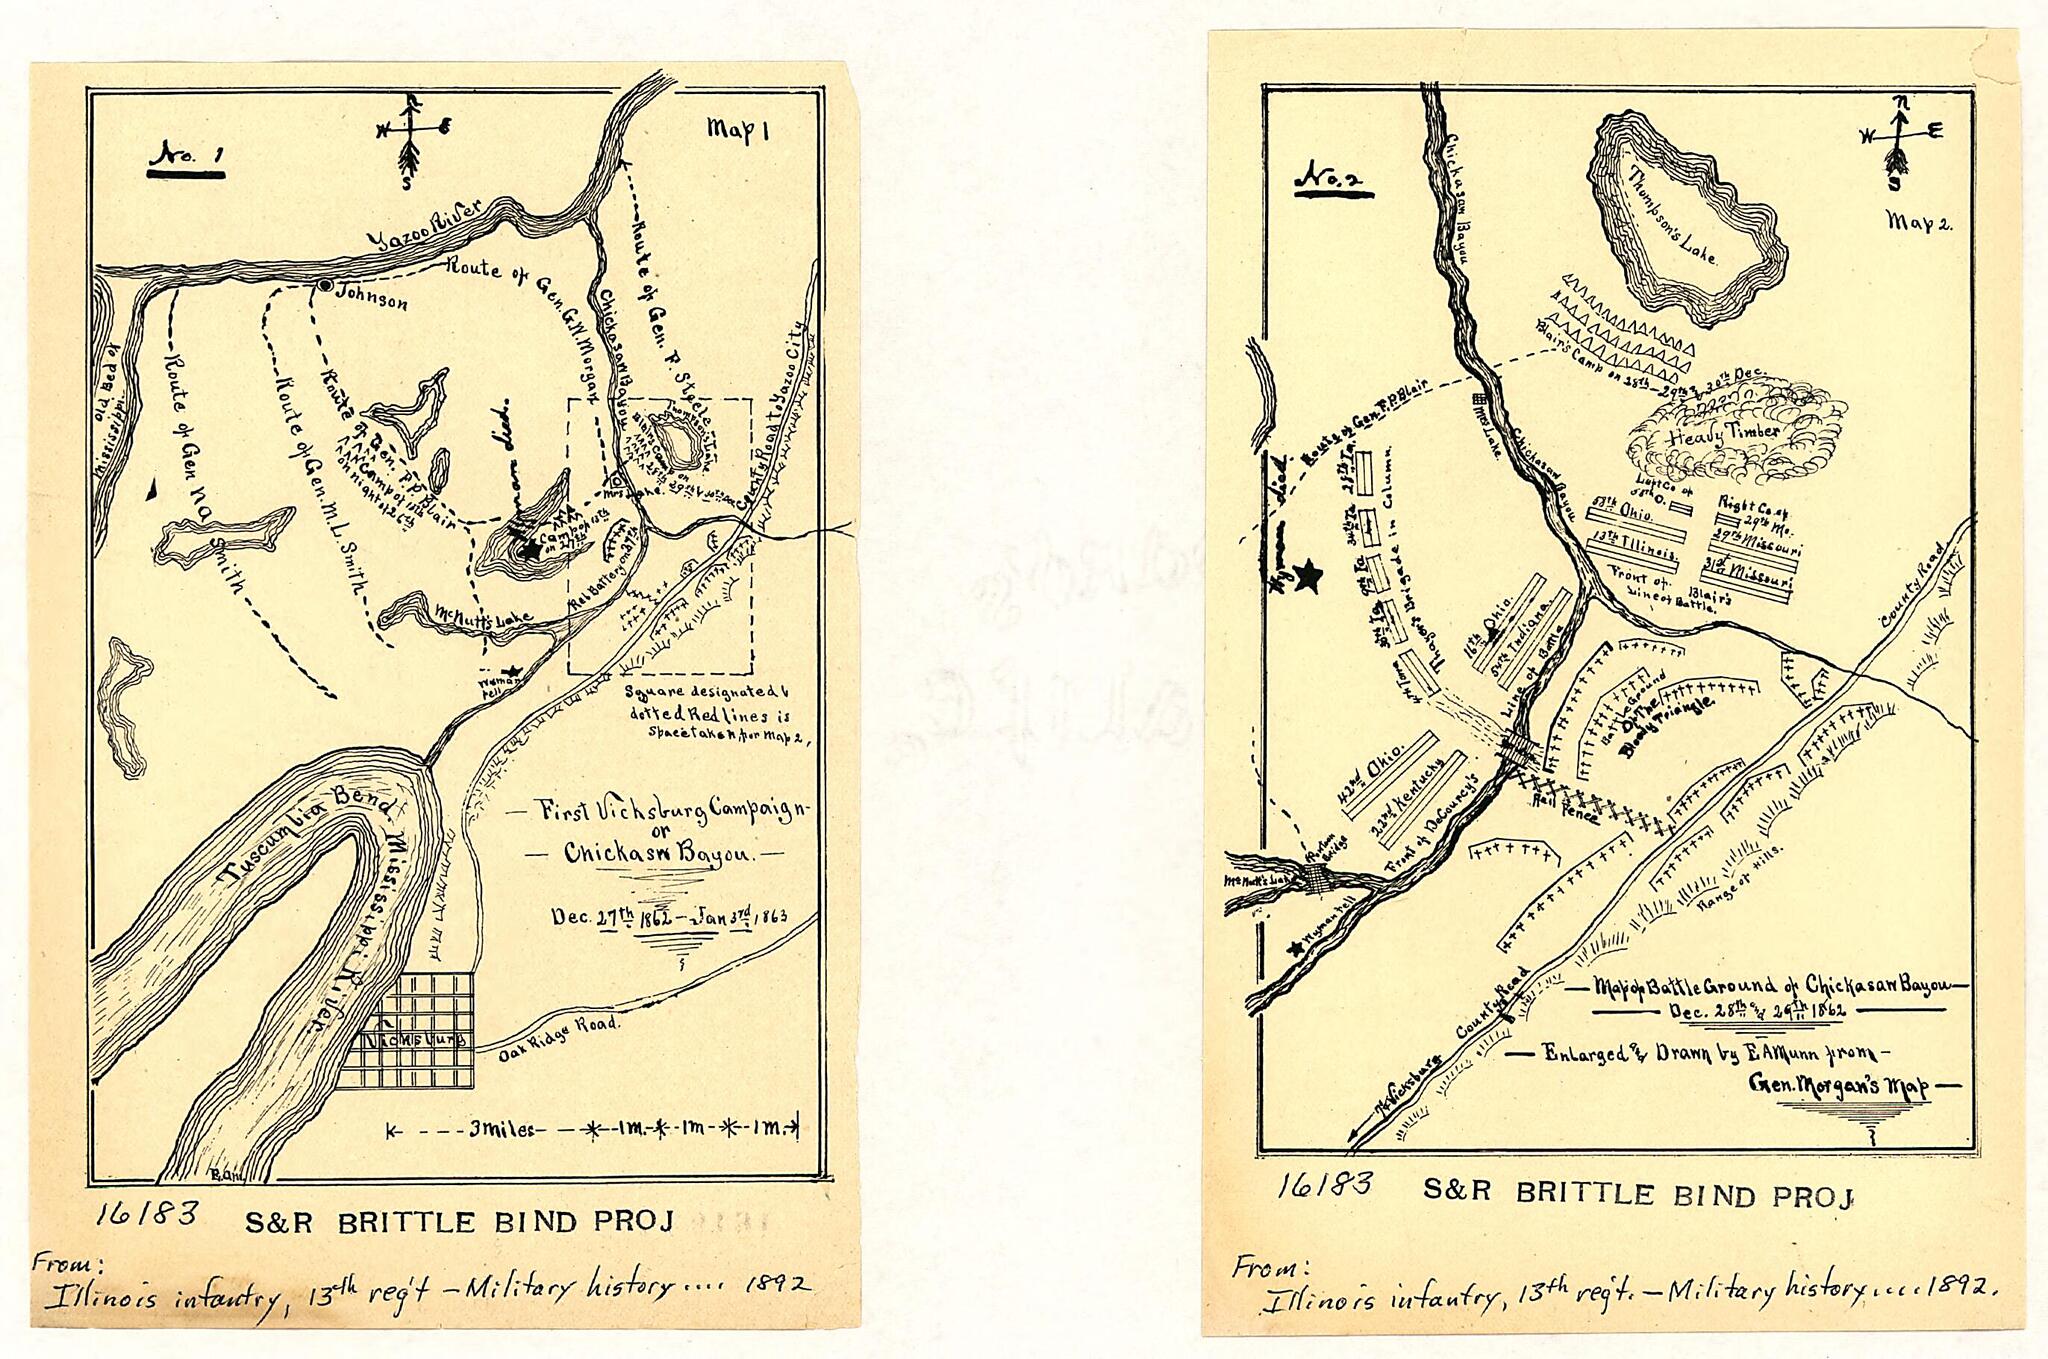 This old map of Jan. 3rd 1863.-No. 2. Map of Battle Ground of Chickasaw Bayou, Dec. 28th and 29th 1862 from 1892 was created by E. A. (Edward A.) Munn in 1892